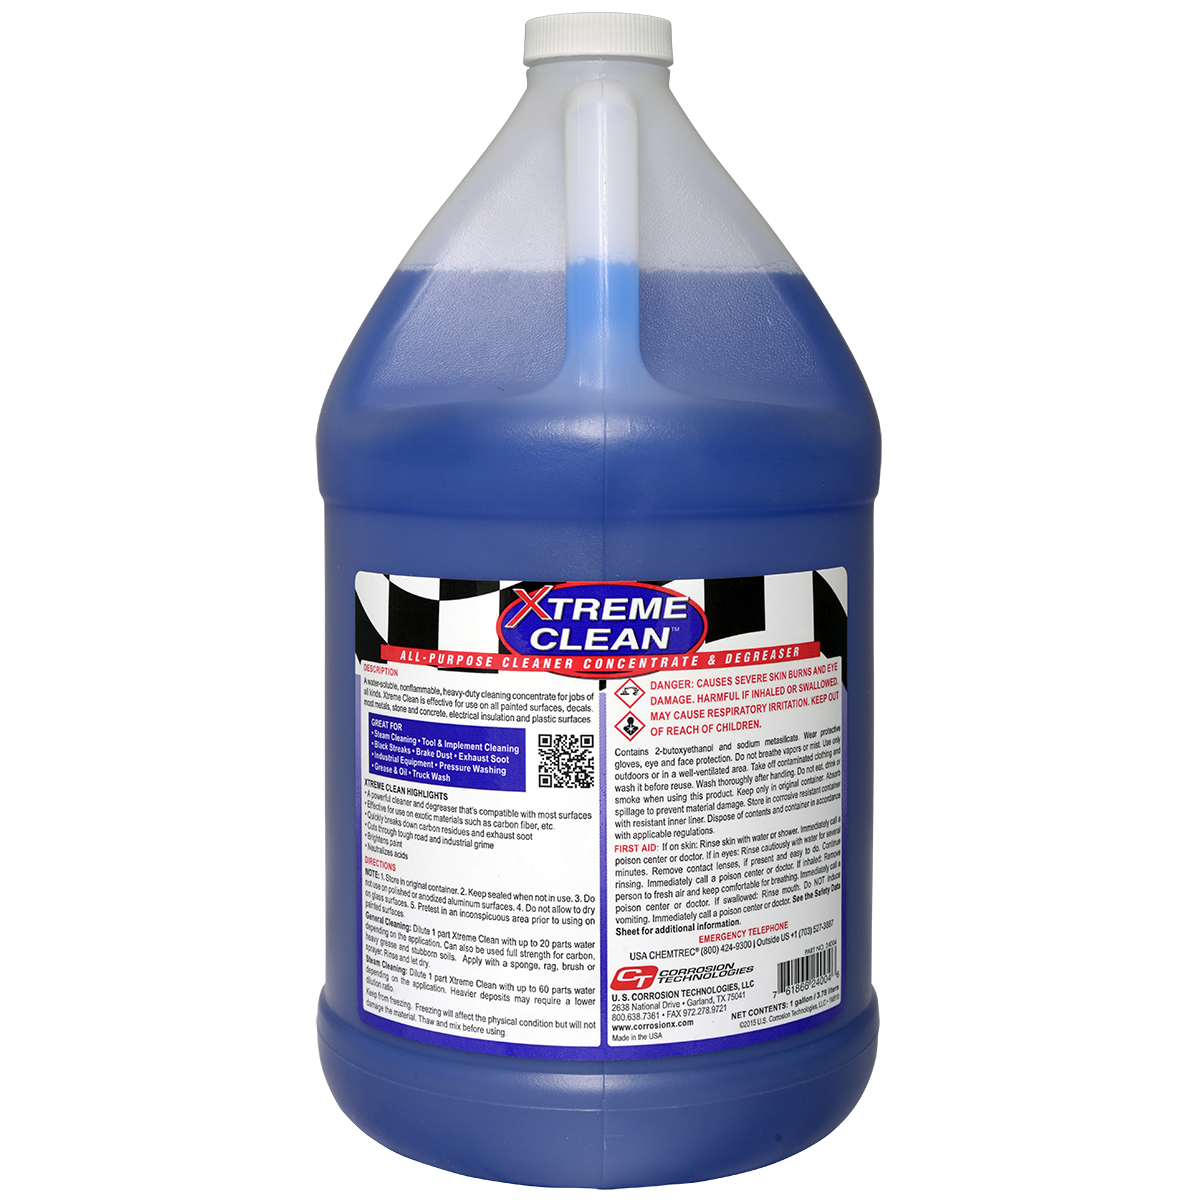 Xtreme Clean General Purpose Cleaner / Degreaser 55 Gallon